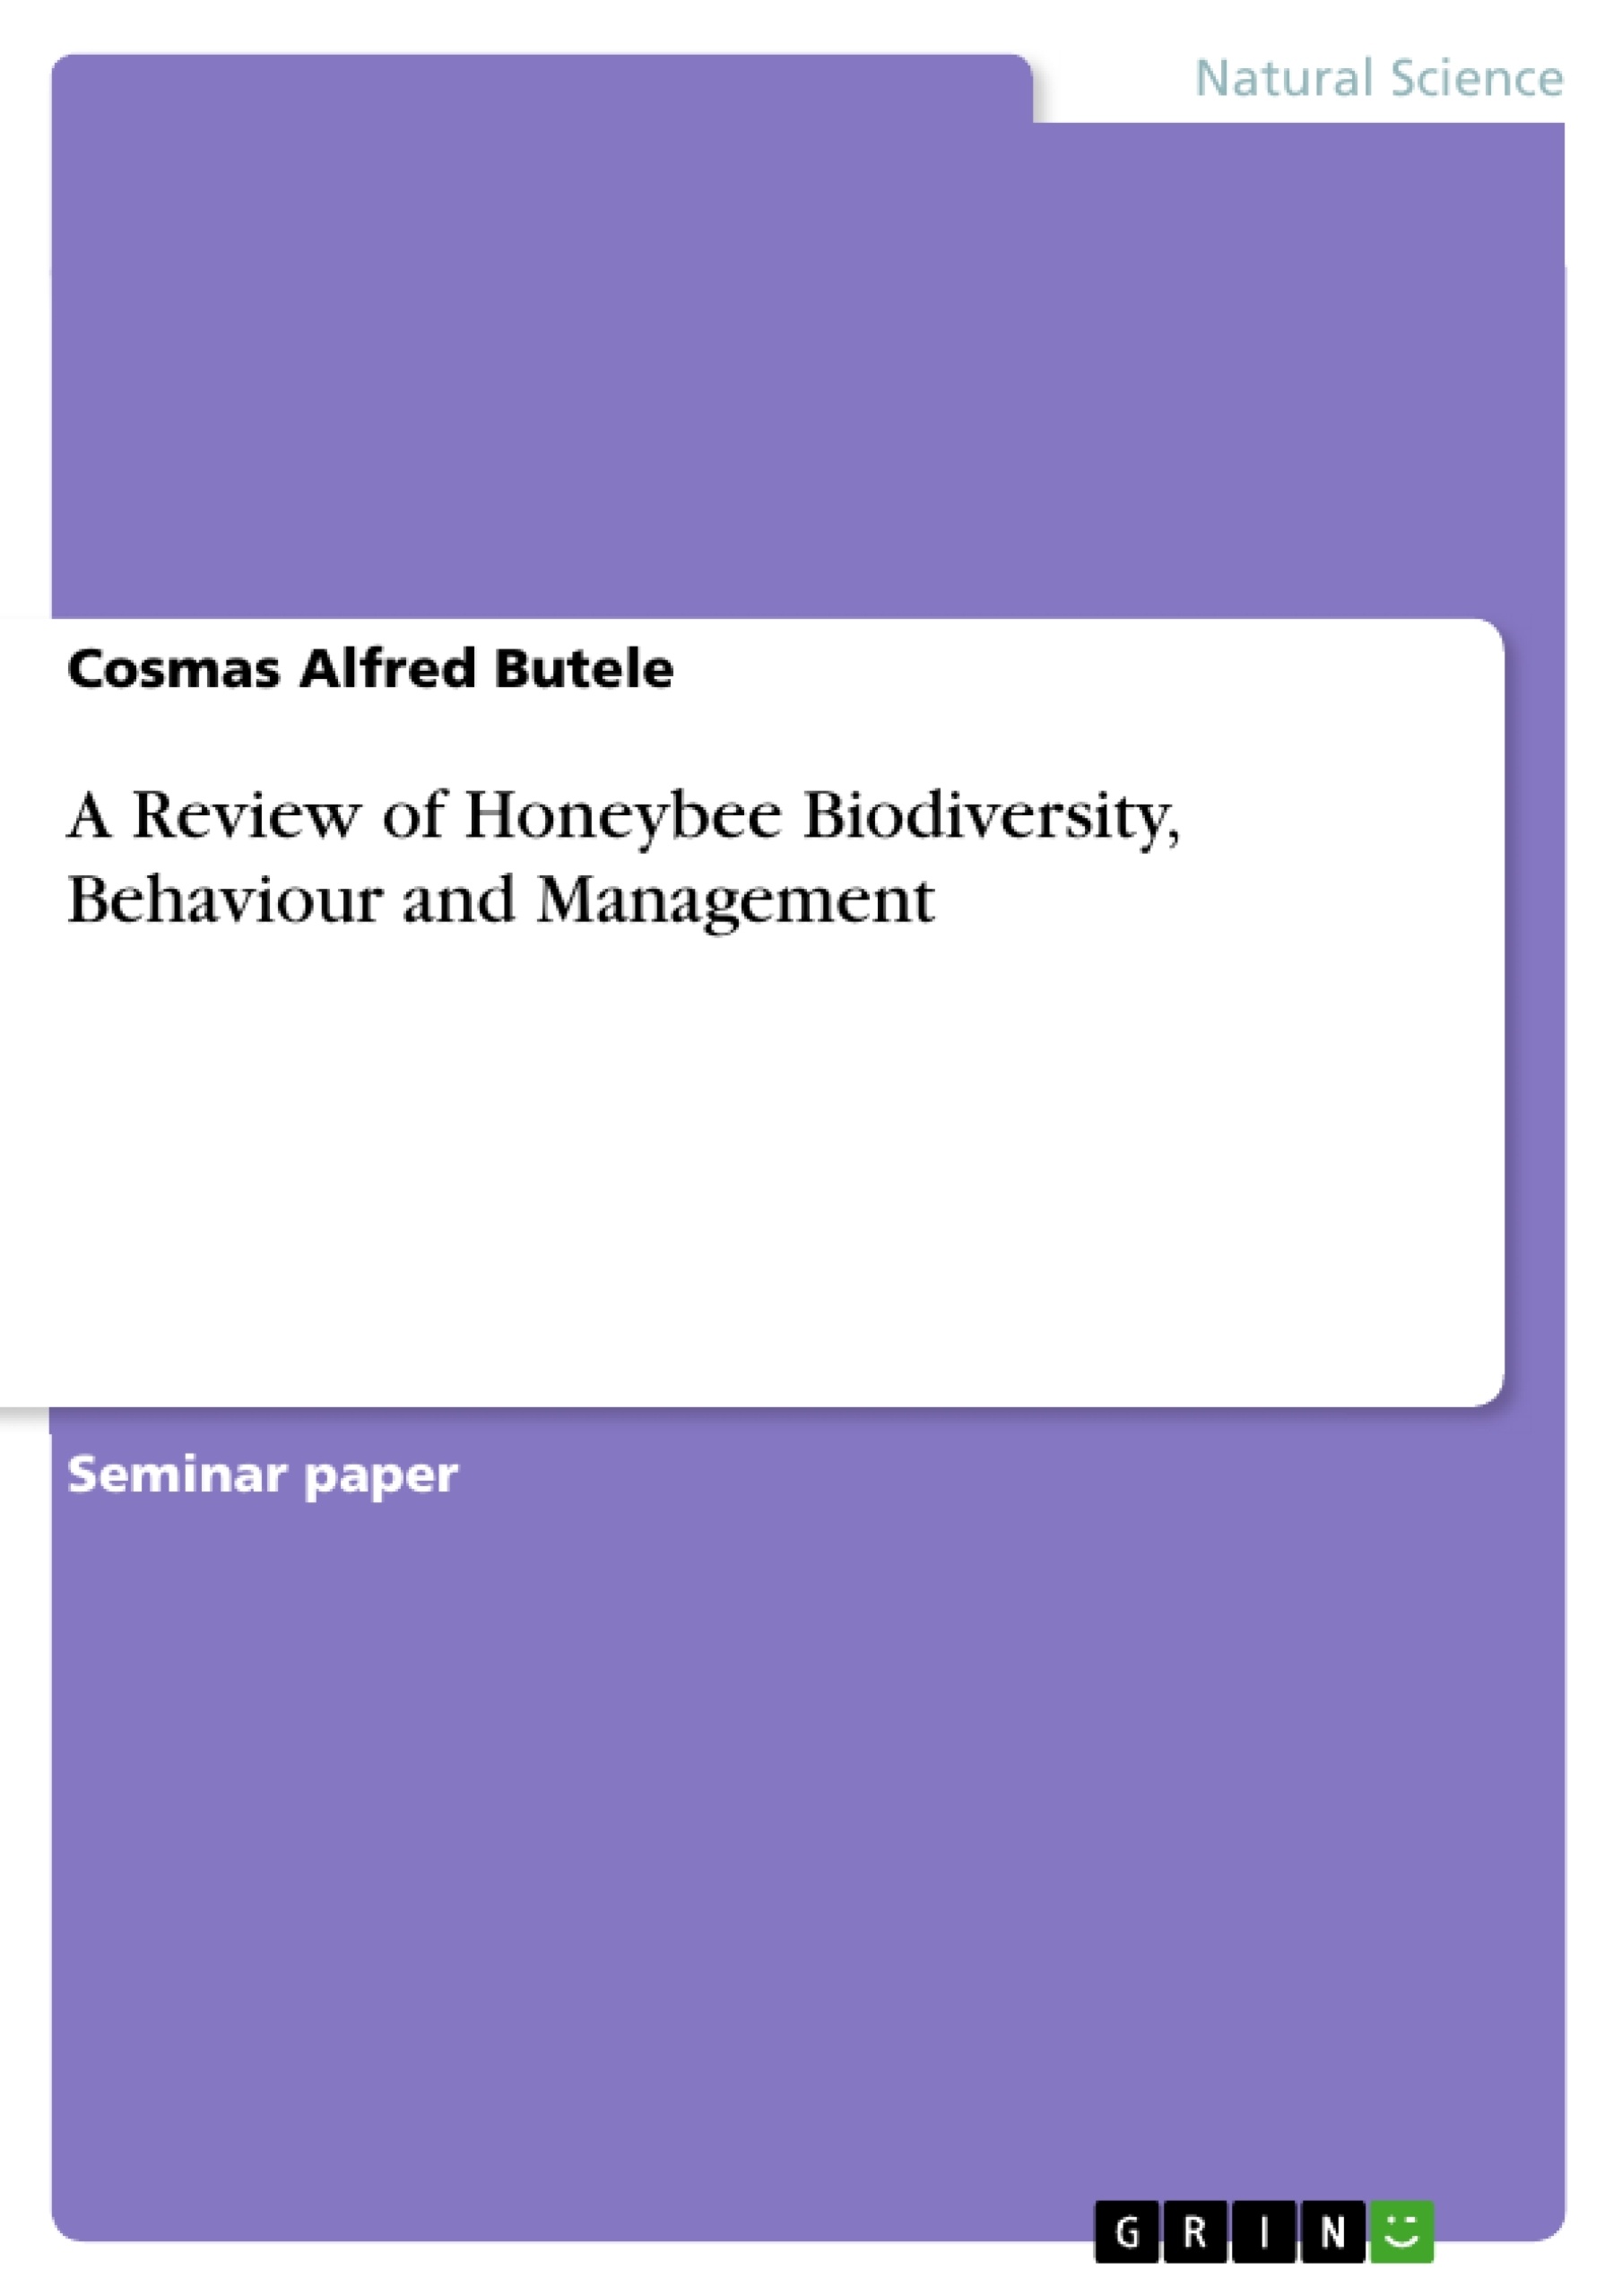 Titel: A Review of Honeybee Biodiversity, Behaviour and Management